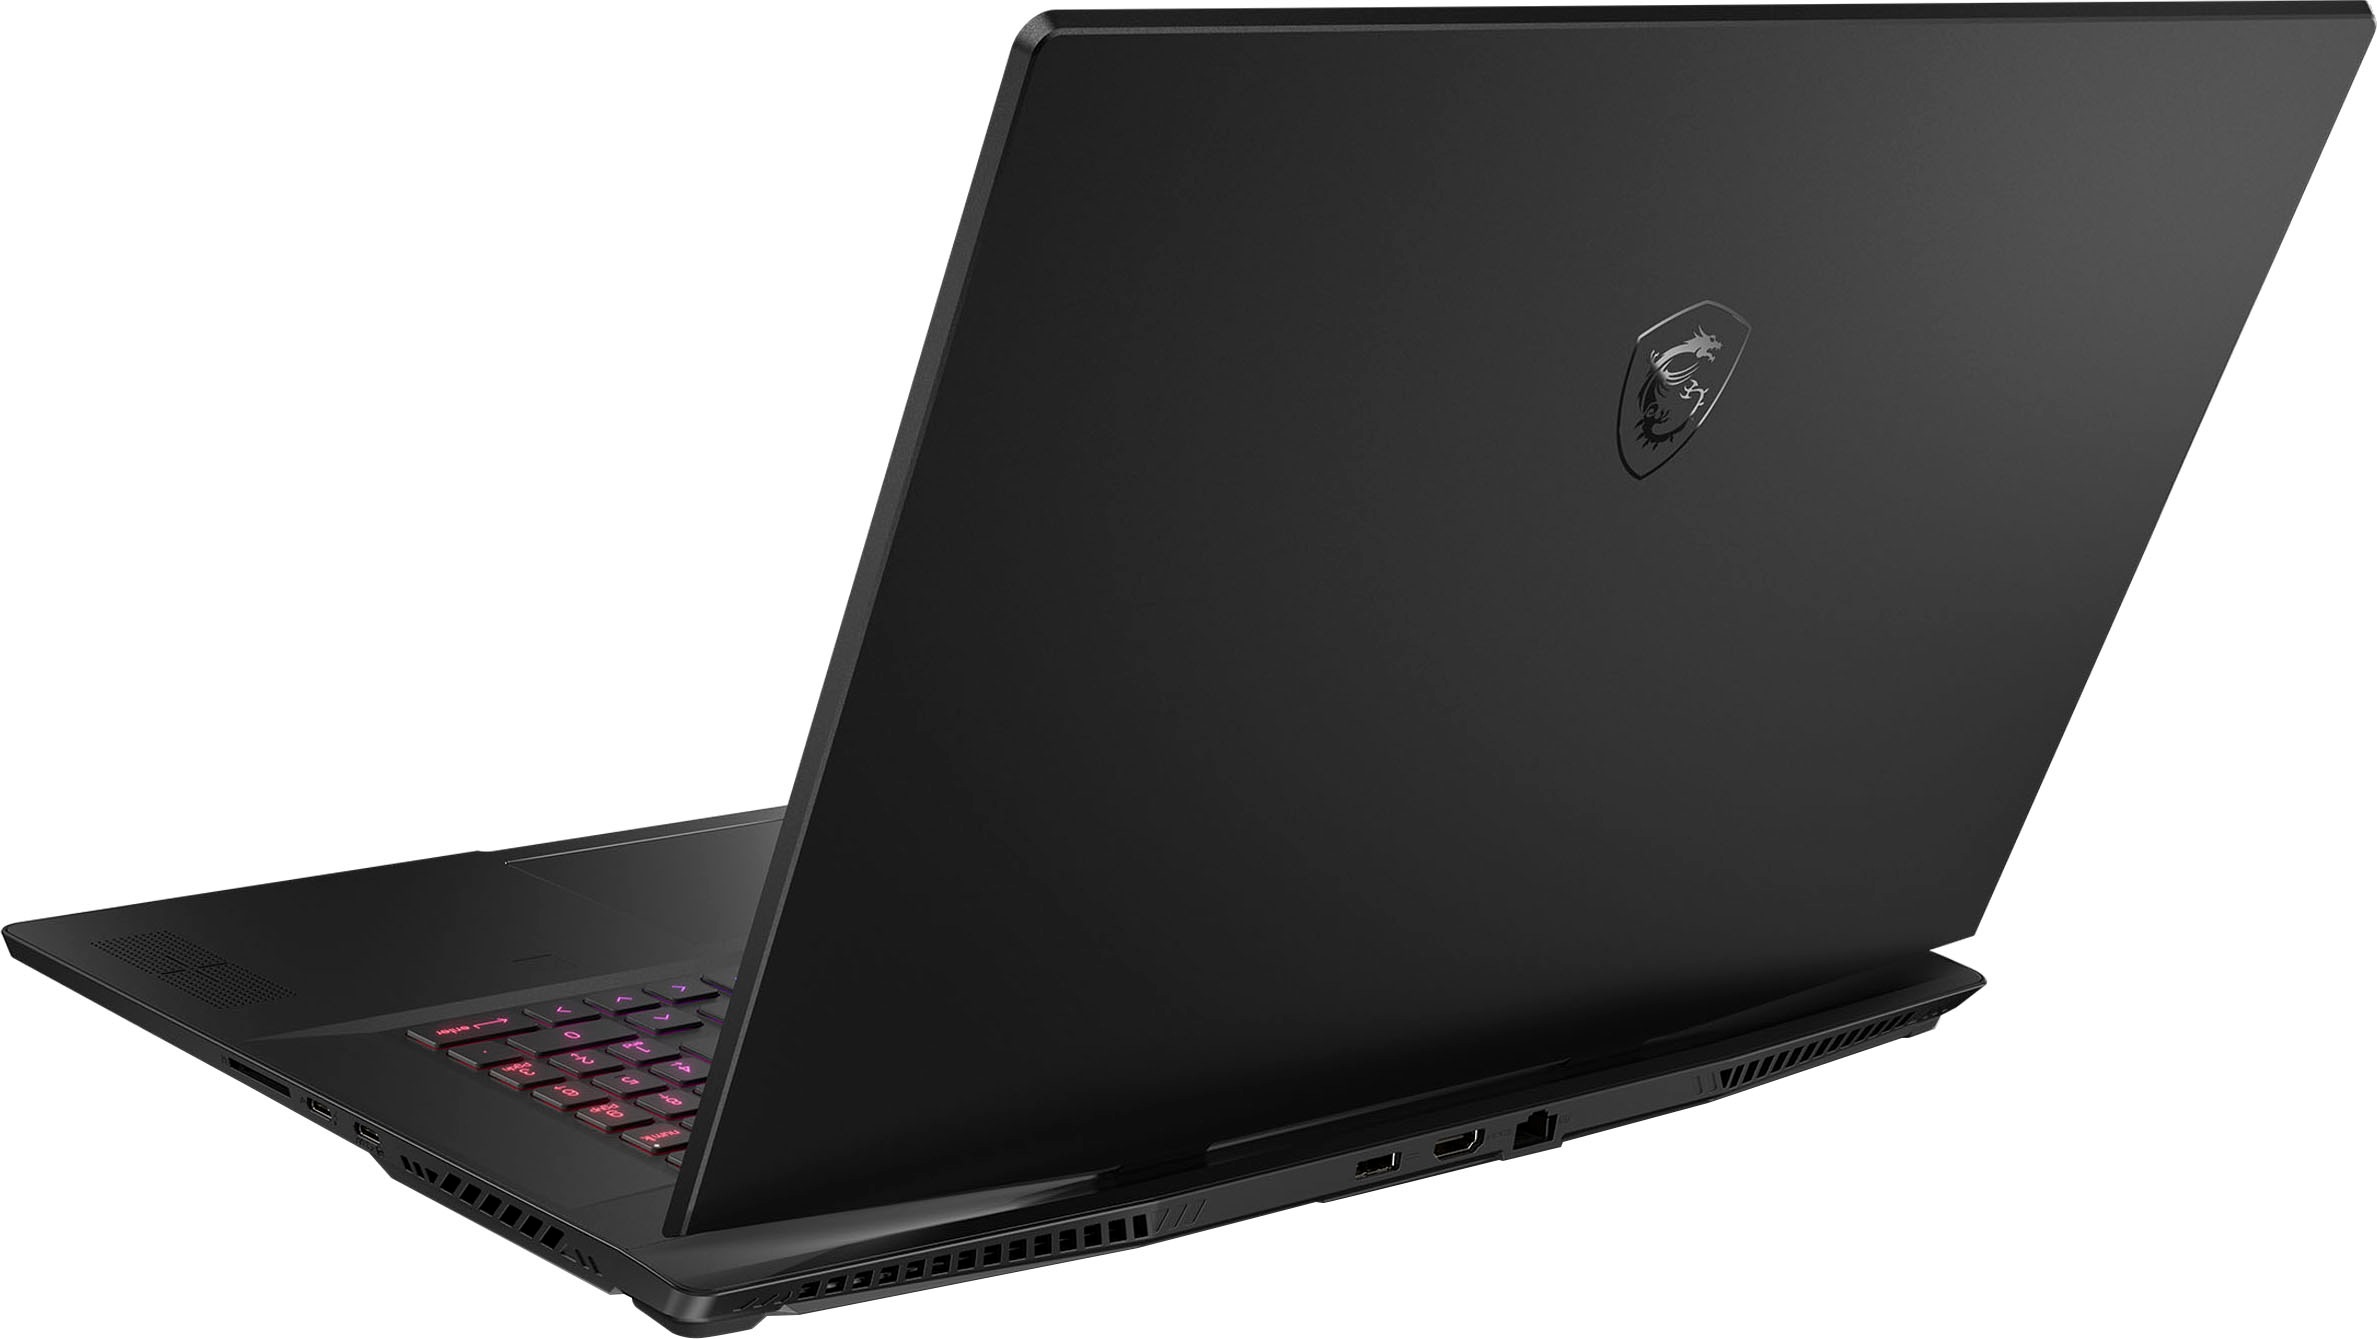 MSI Gaming-Notebook »Stealth GS77 12UHS-063«, 43,9 cm, / 17,3 Zoll, Intel, Core i9, GeForce RTX 3080 Ti, 2000 GB SSD